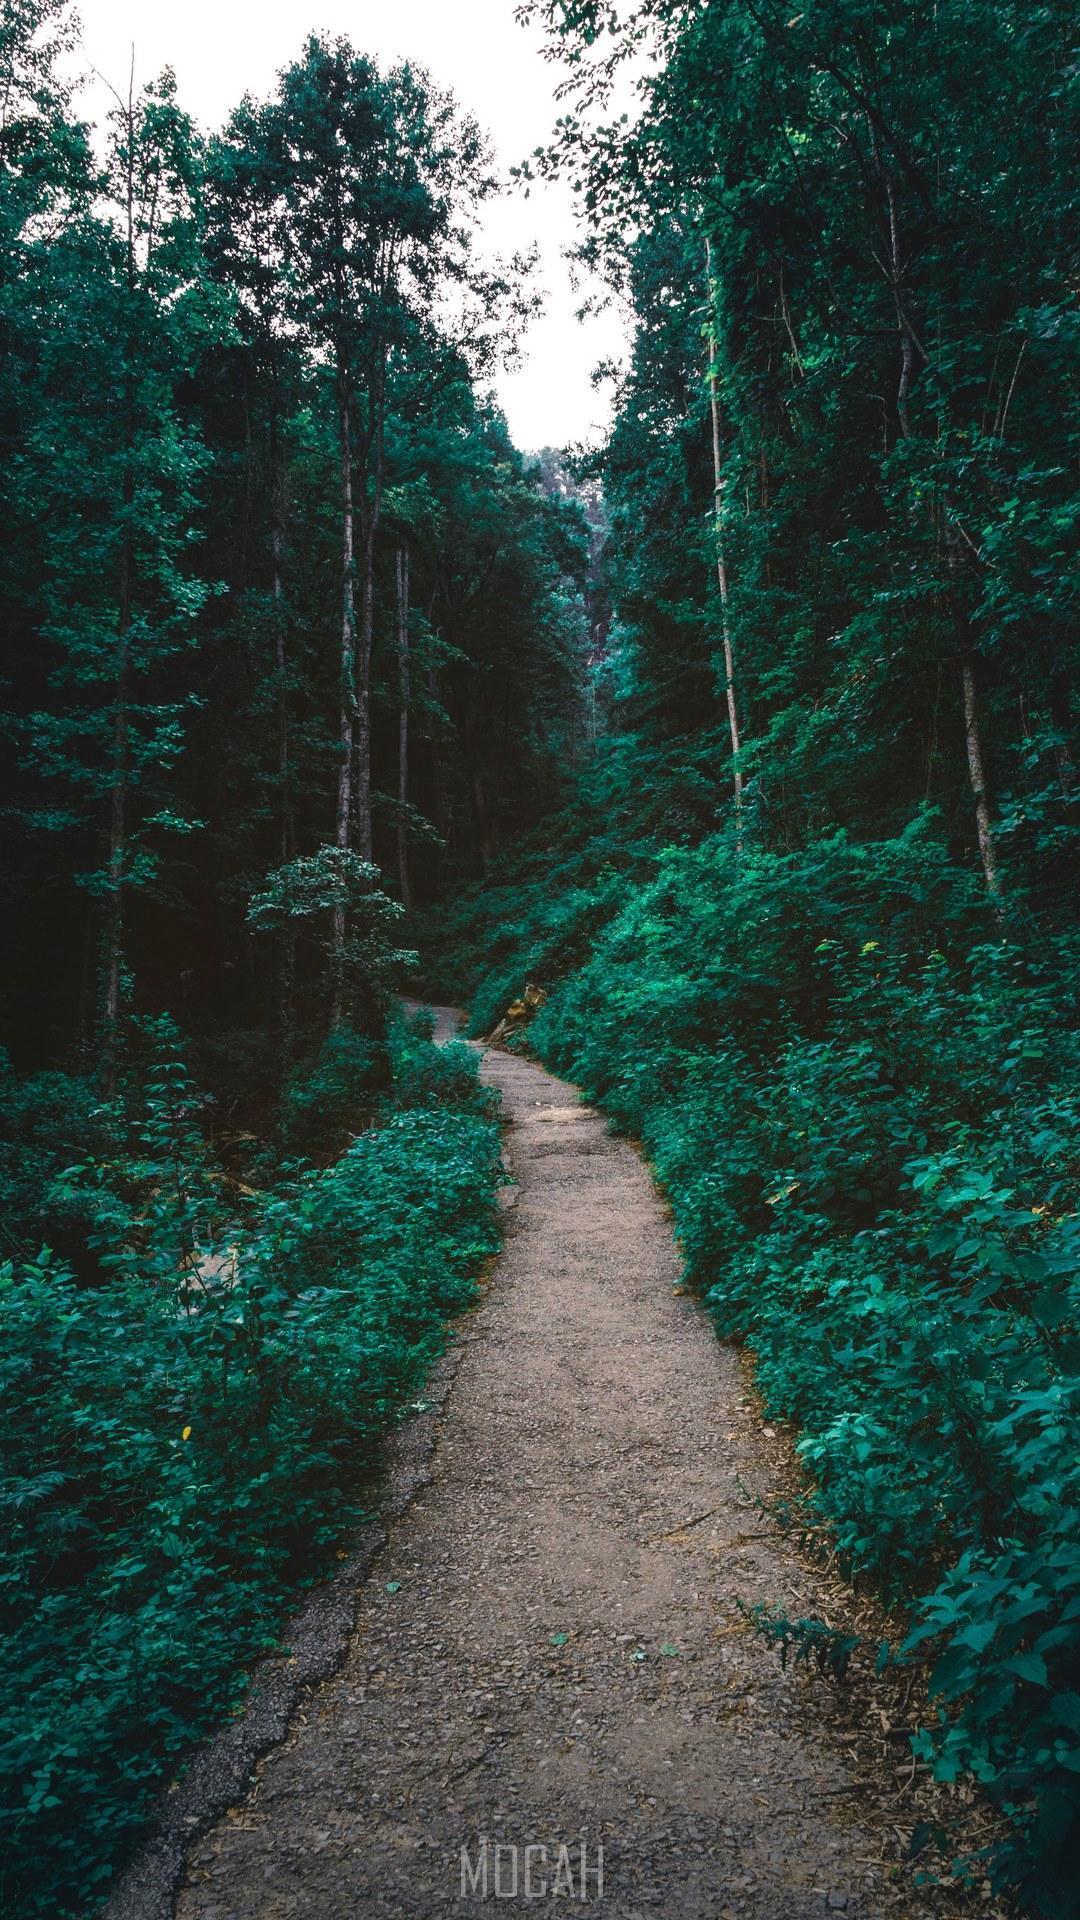 HD wallpaper, Riding On The Rolling Tide, A Dirt Path Through A Verdant Forest In Amicalola Falls State Park, Sony Xperia Xa1 Ultra Wallpaper Full Hd, 1080X1920